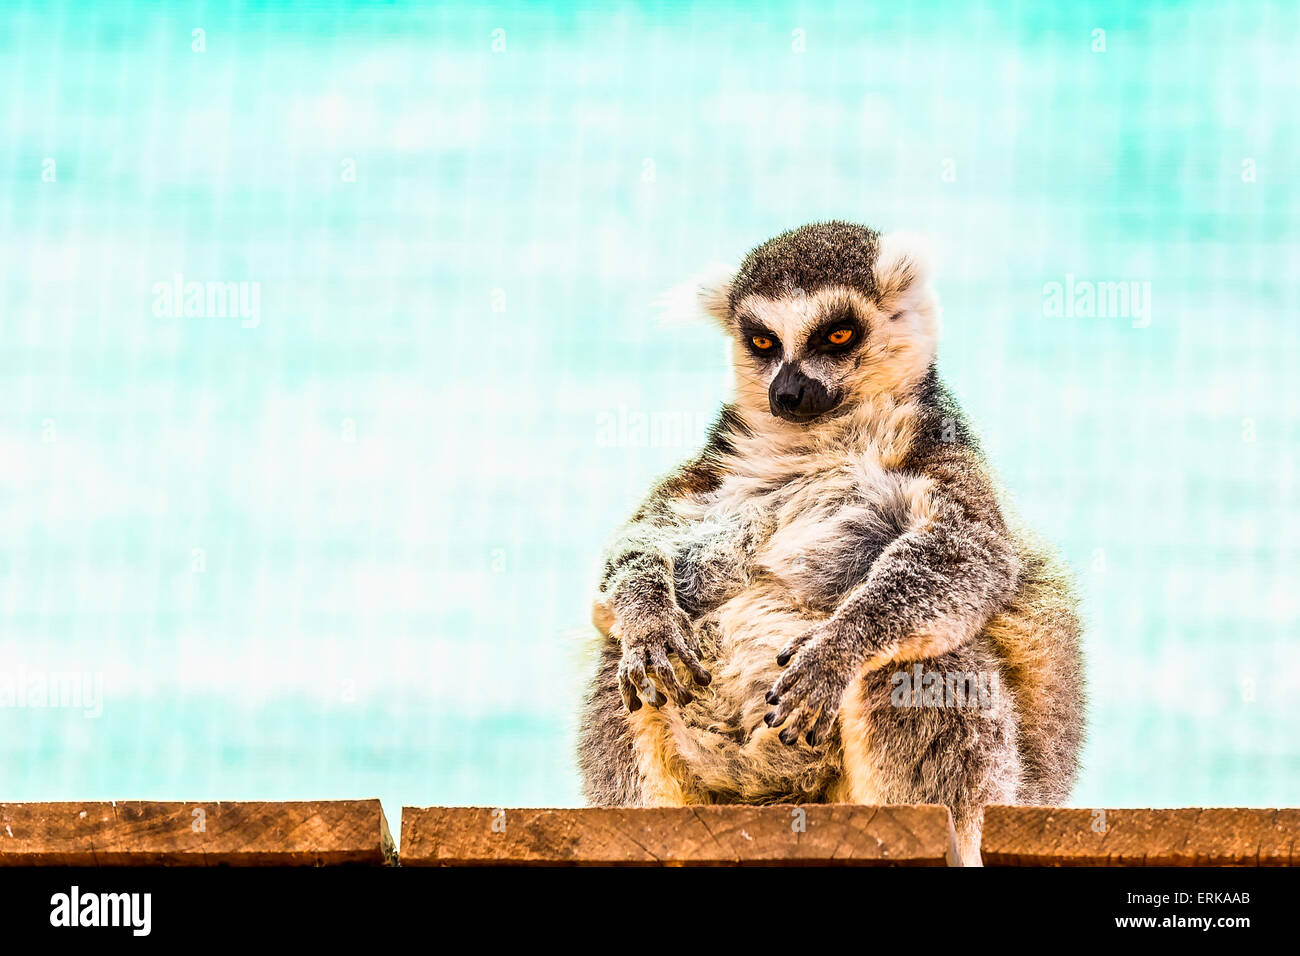 Fatty funny lemur with a big belly sitting on the wood board planks in zoo on turquoise background Stock Photo